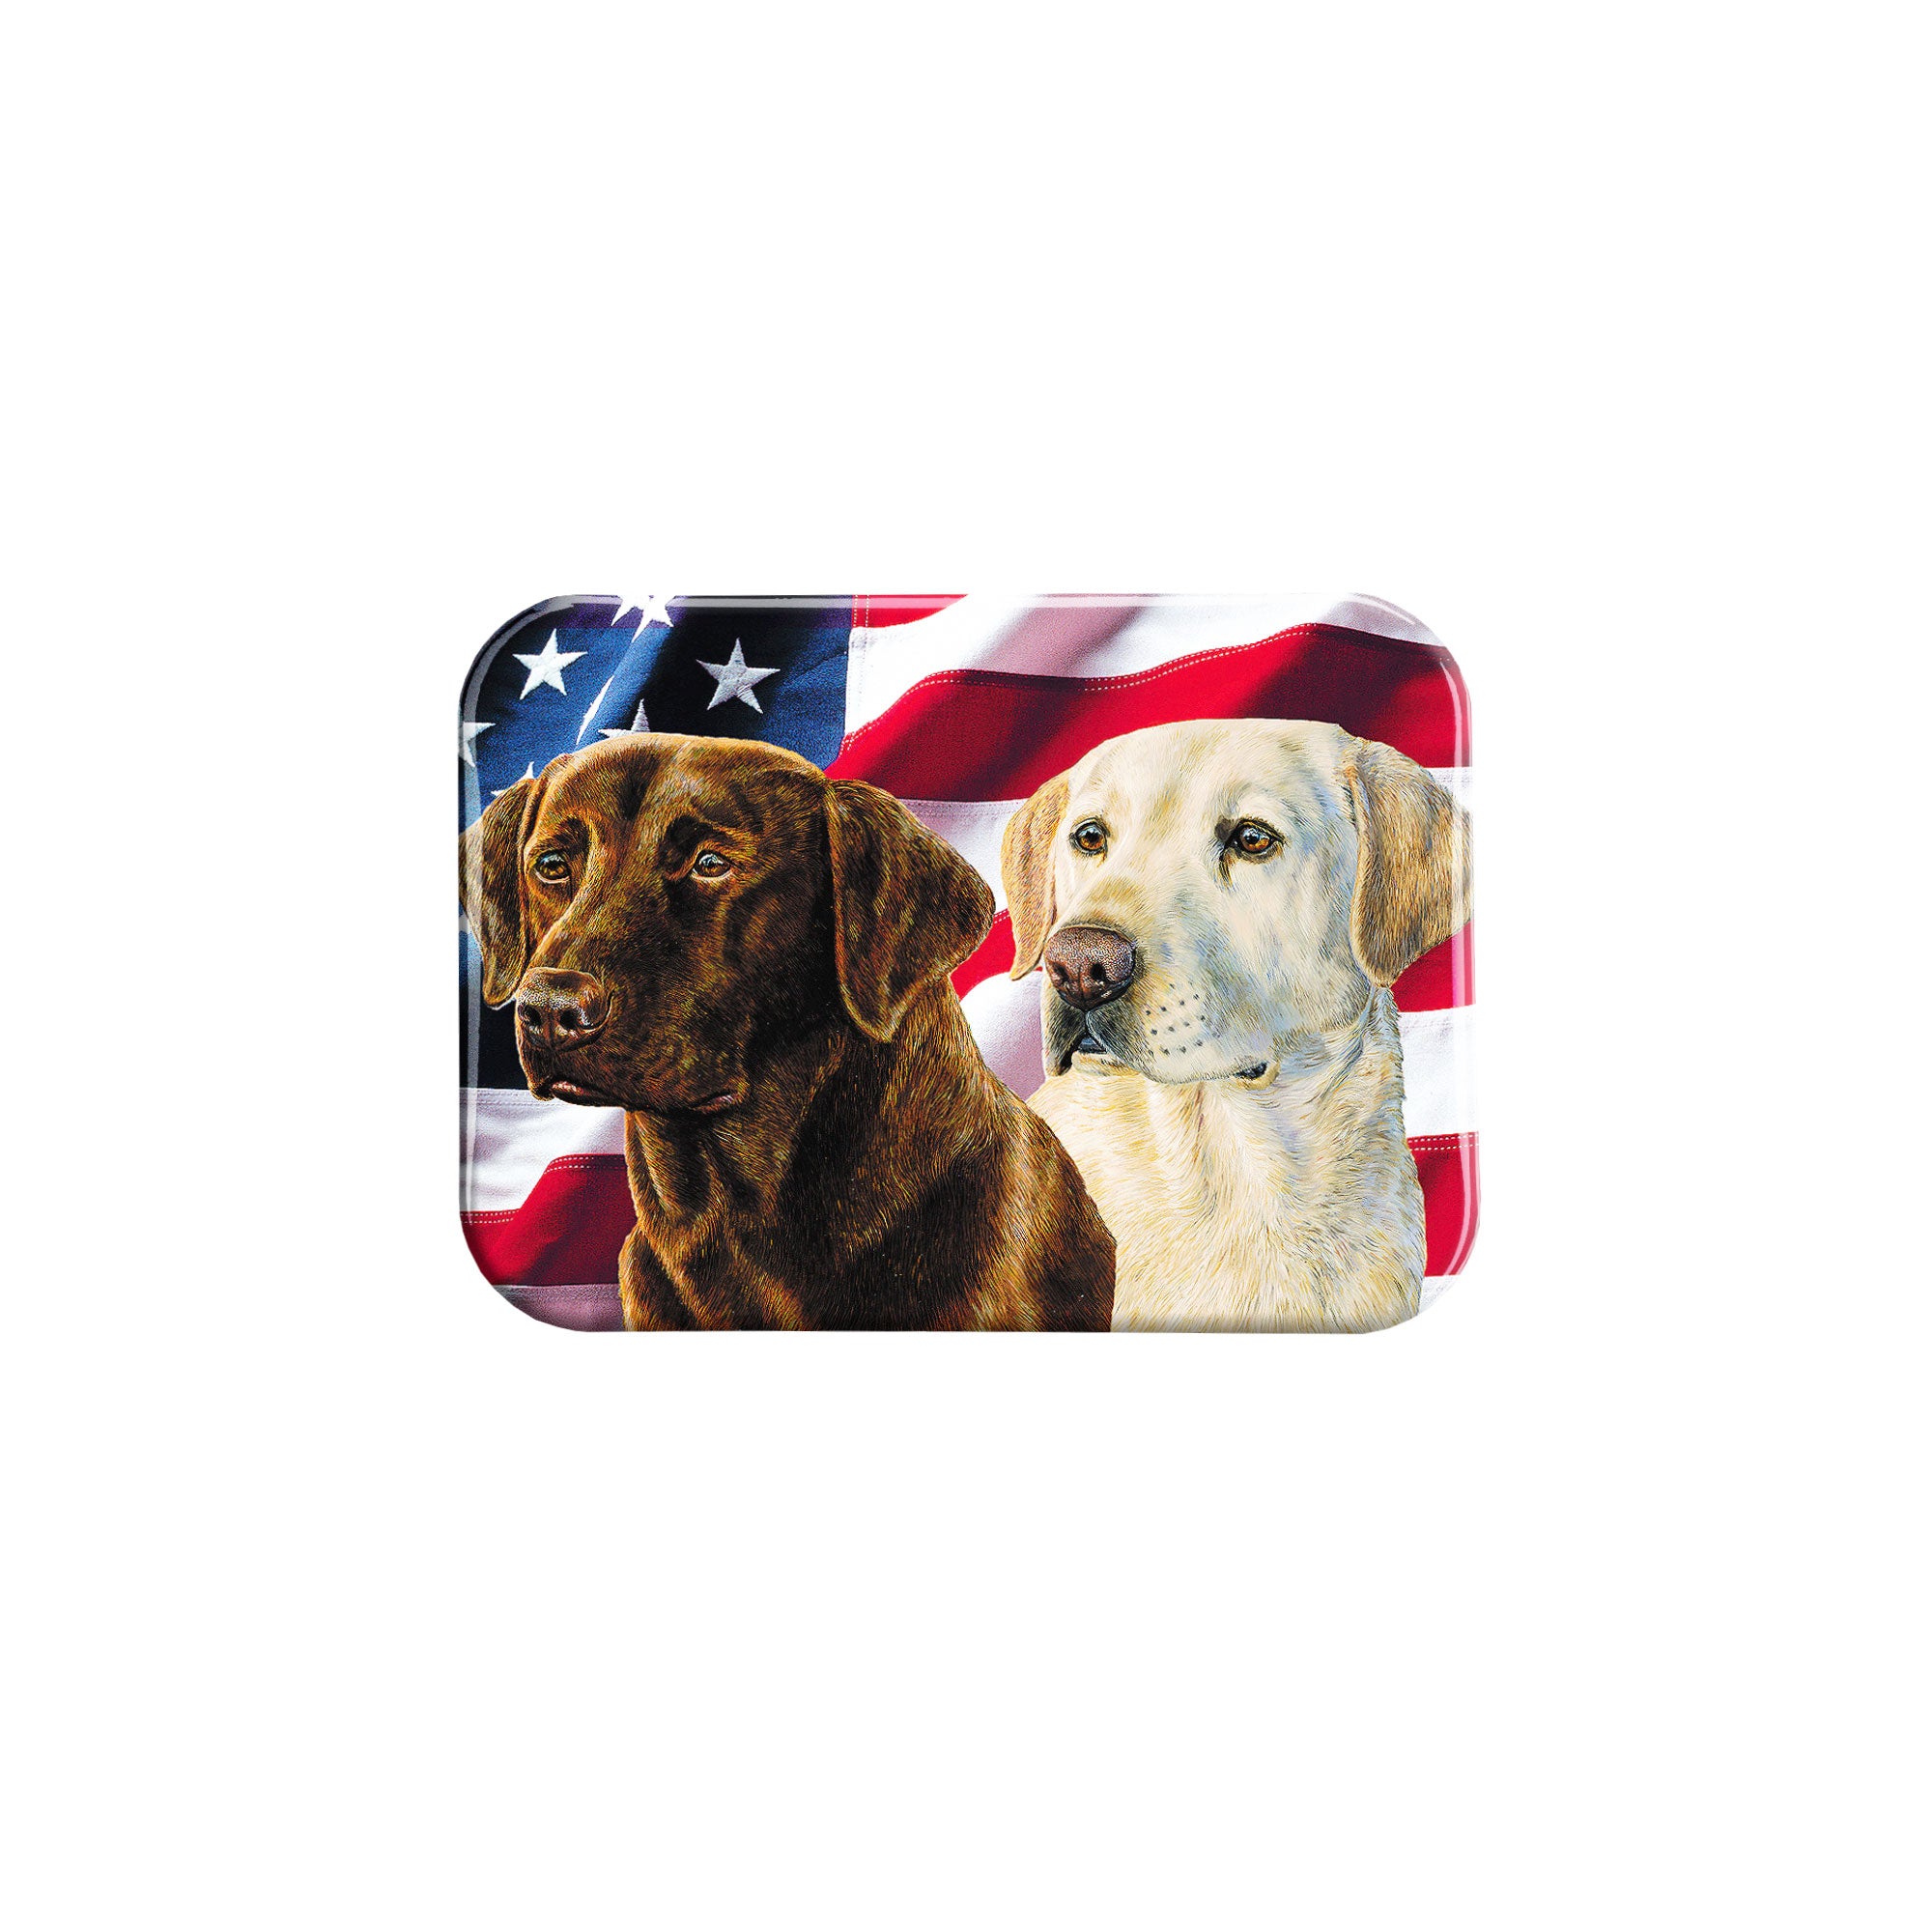 "American Chocolate and Yellow Lab" - 2.5" X 3.5" Rectangle Fridge Magnets